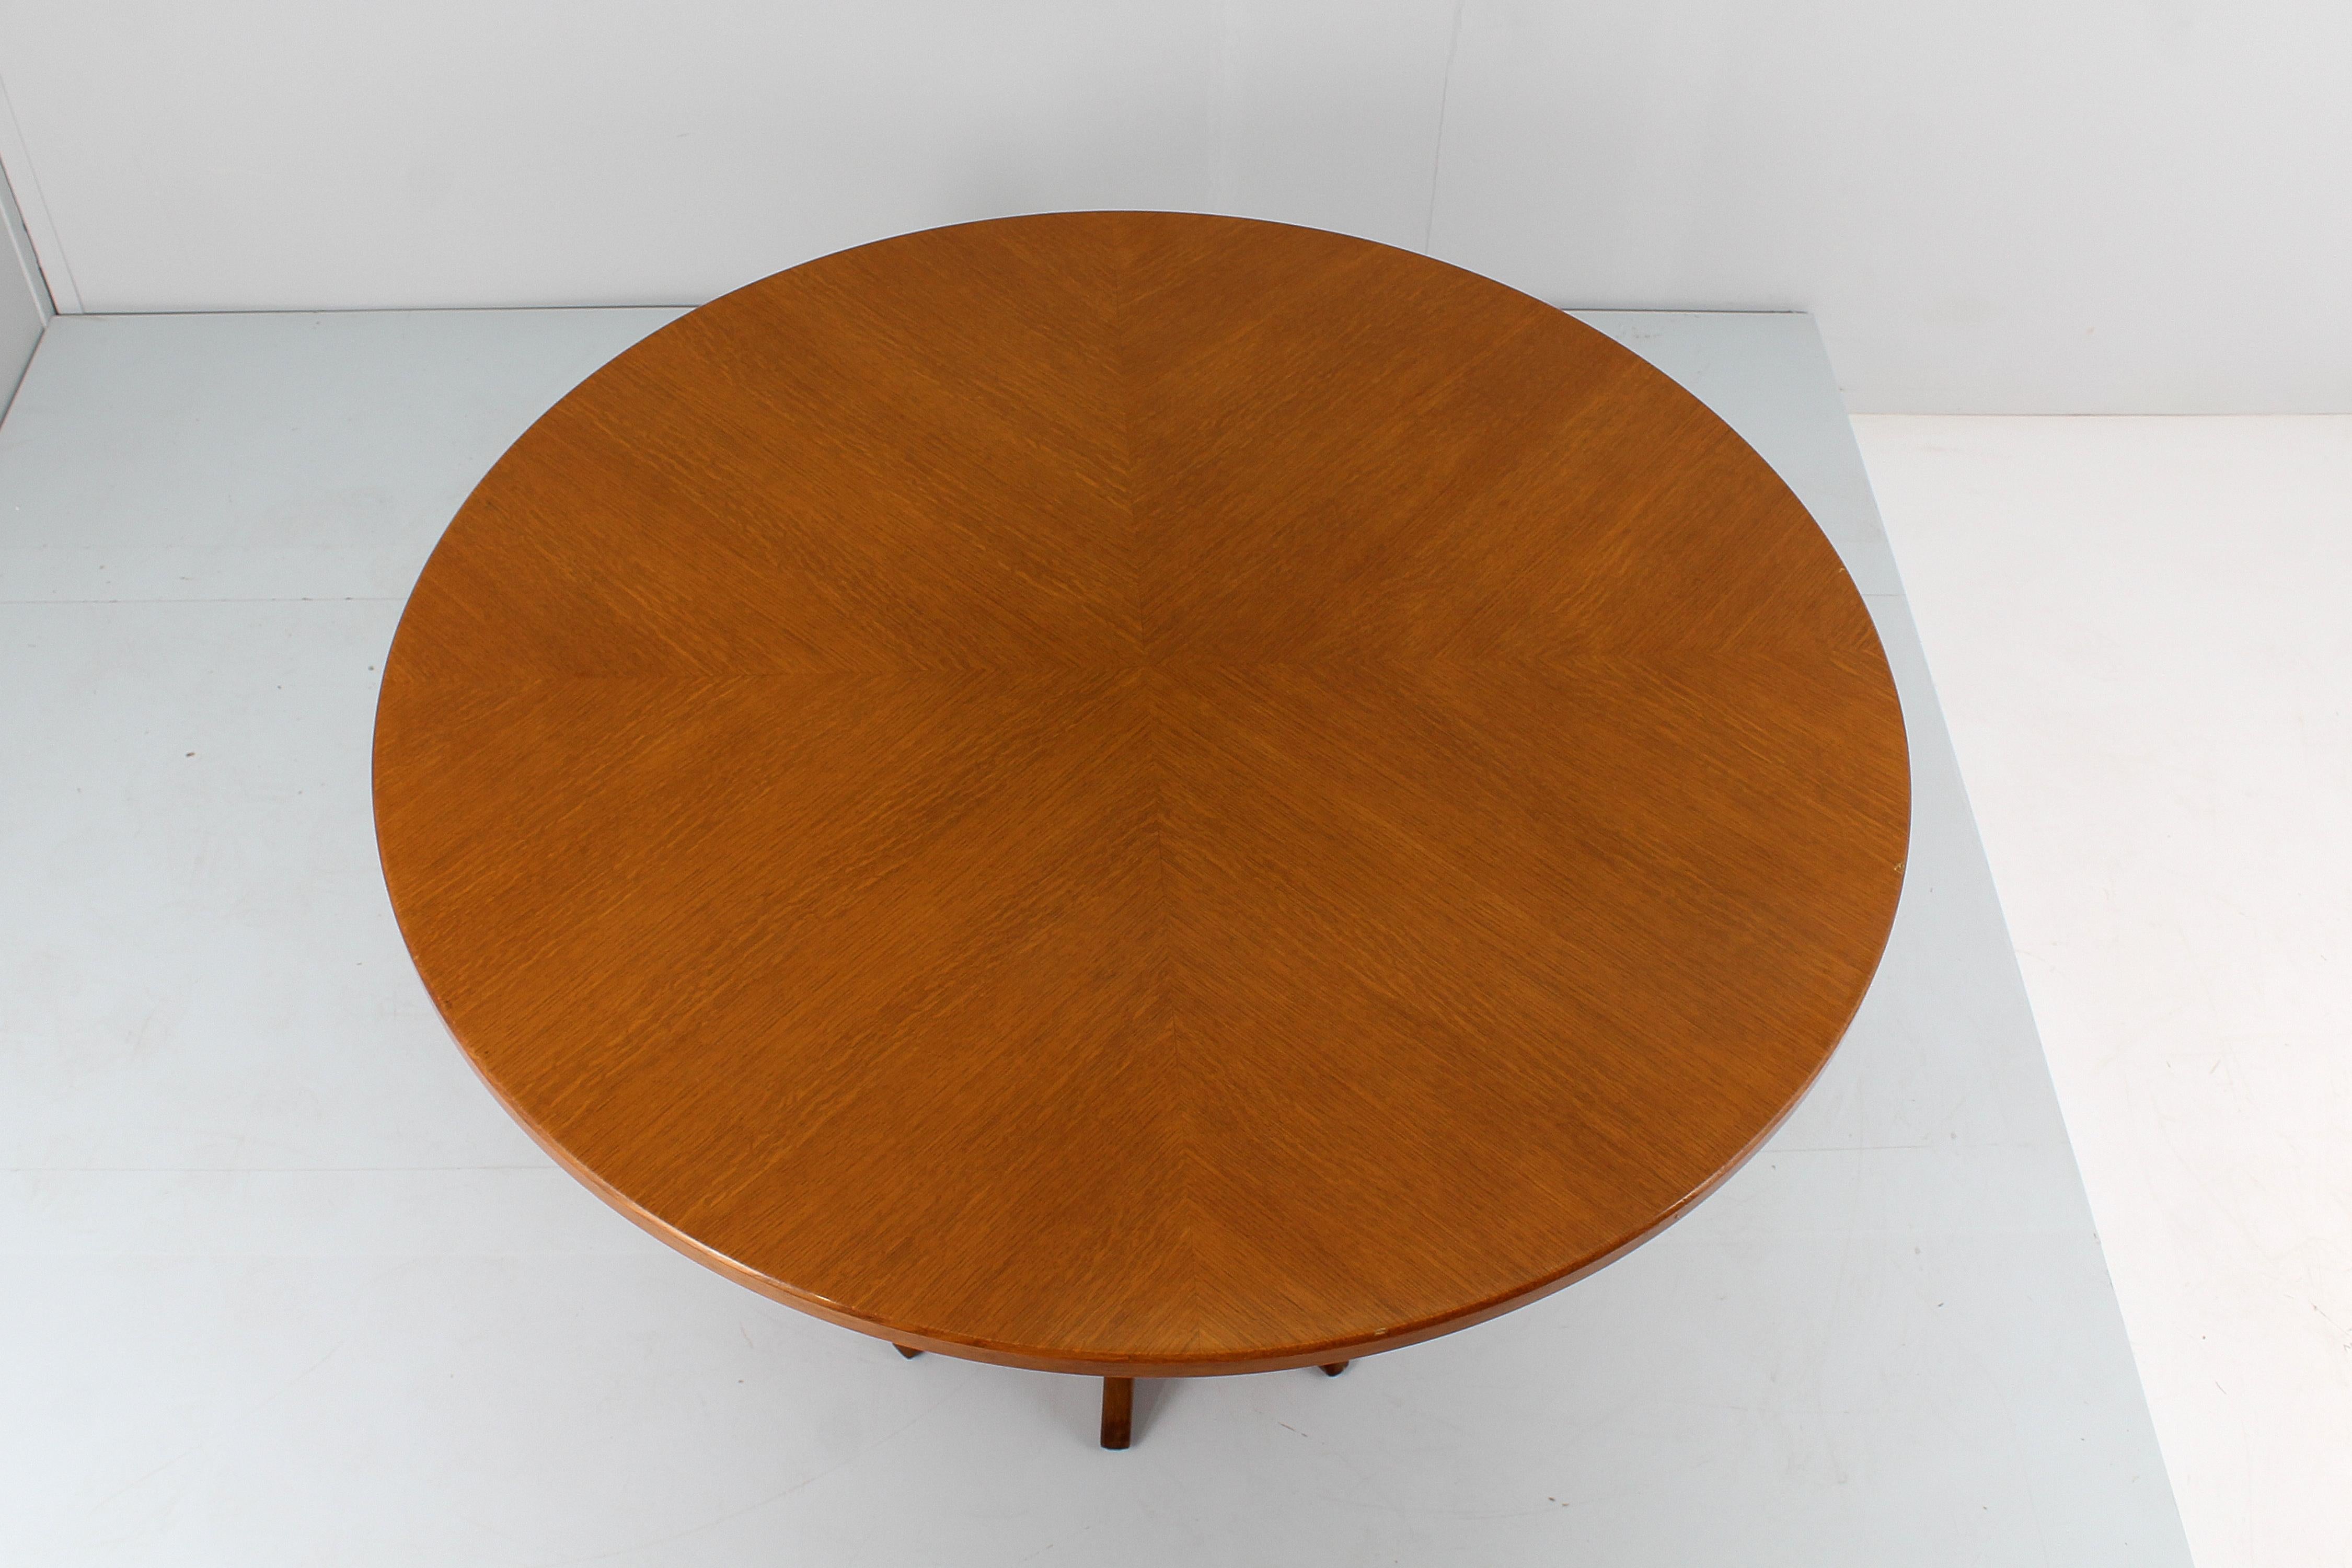 Late 20th Century Mid-Century A. Mangiarotti style Wooden Round Diner Table 70s Italy For Sale